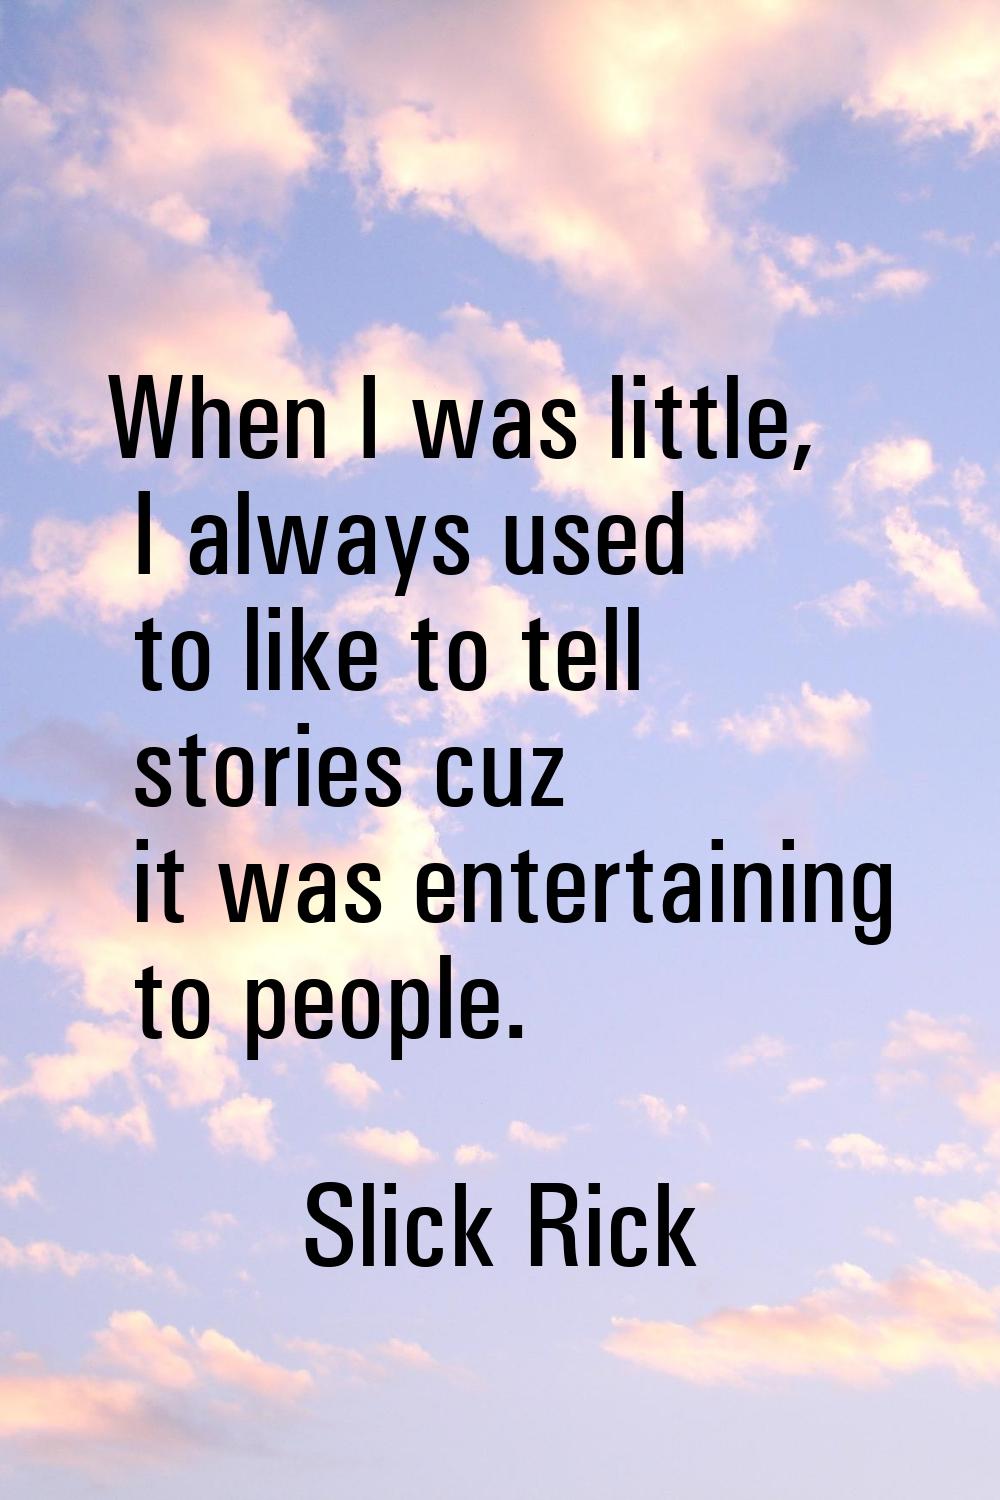 When I was little, I always used to like to tell stories cuz it was entertaining to people.